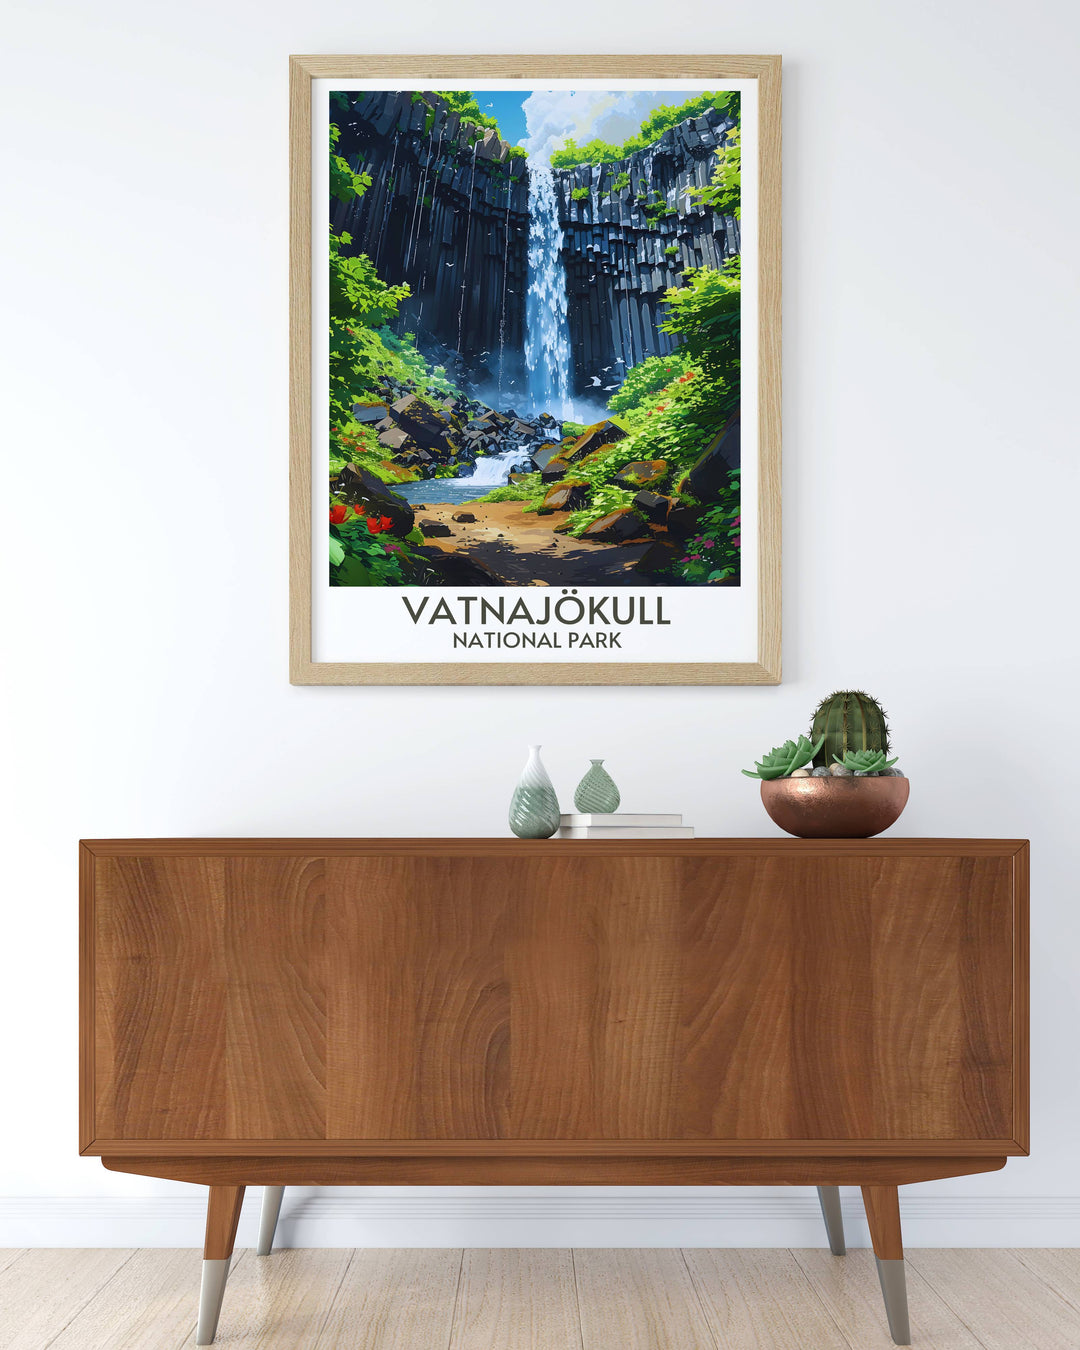 Detailed art print of Svartifoss Waterfall in Vatnajökull capturing the striking basalt columns and vibrant waters a stunning piece for any wall decor.